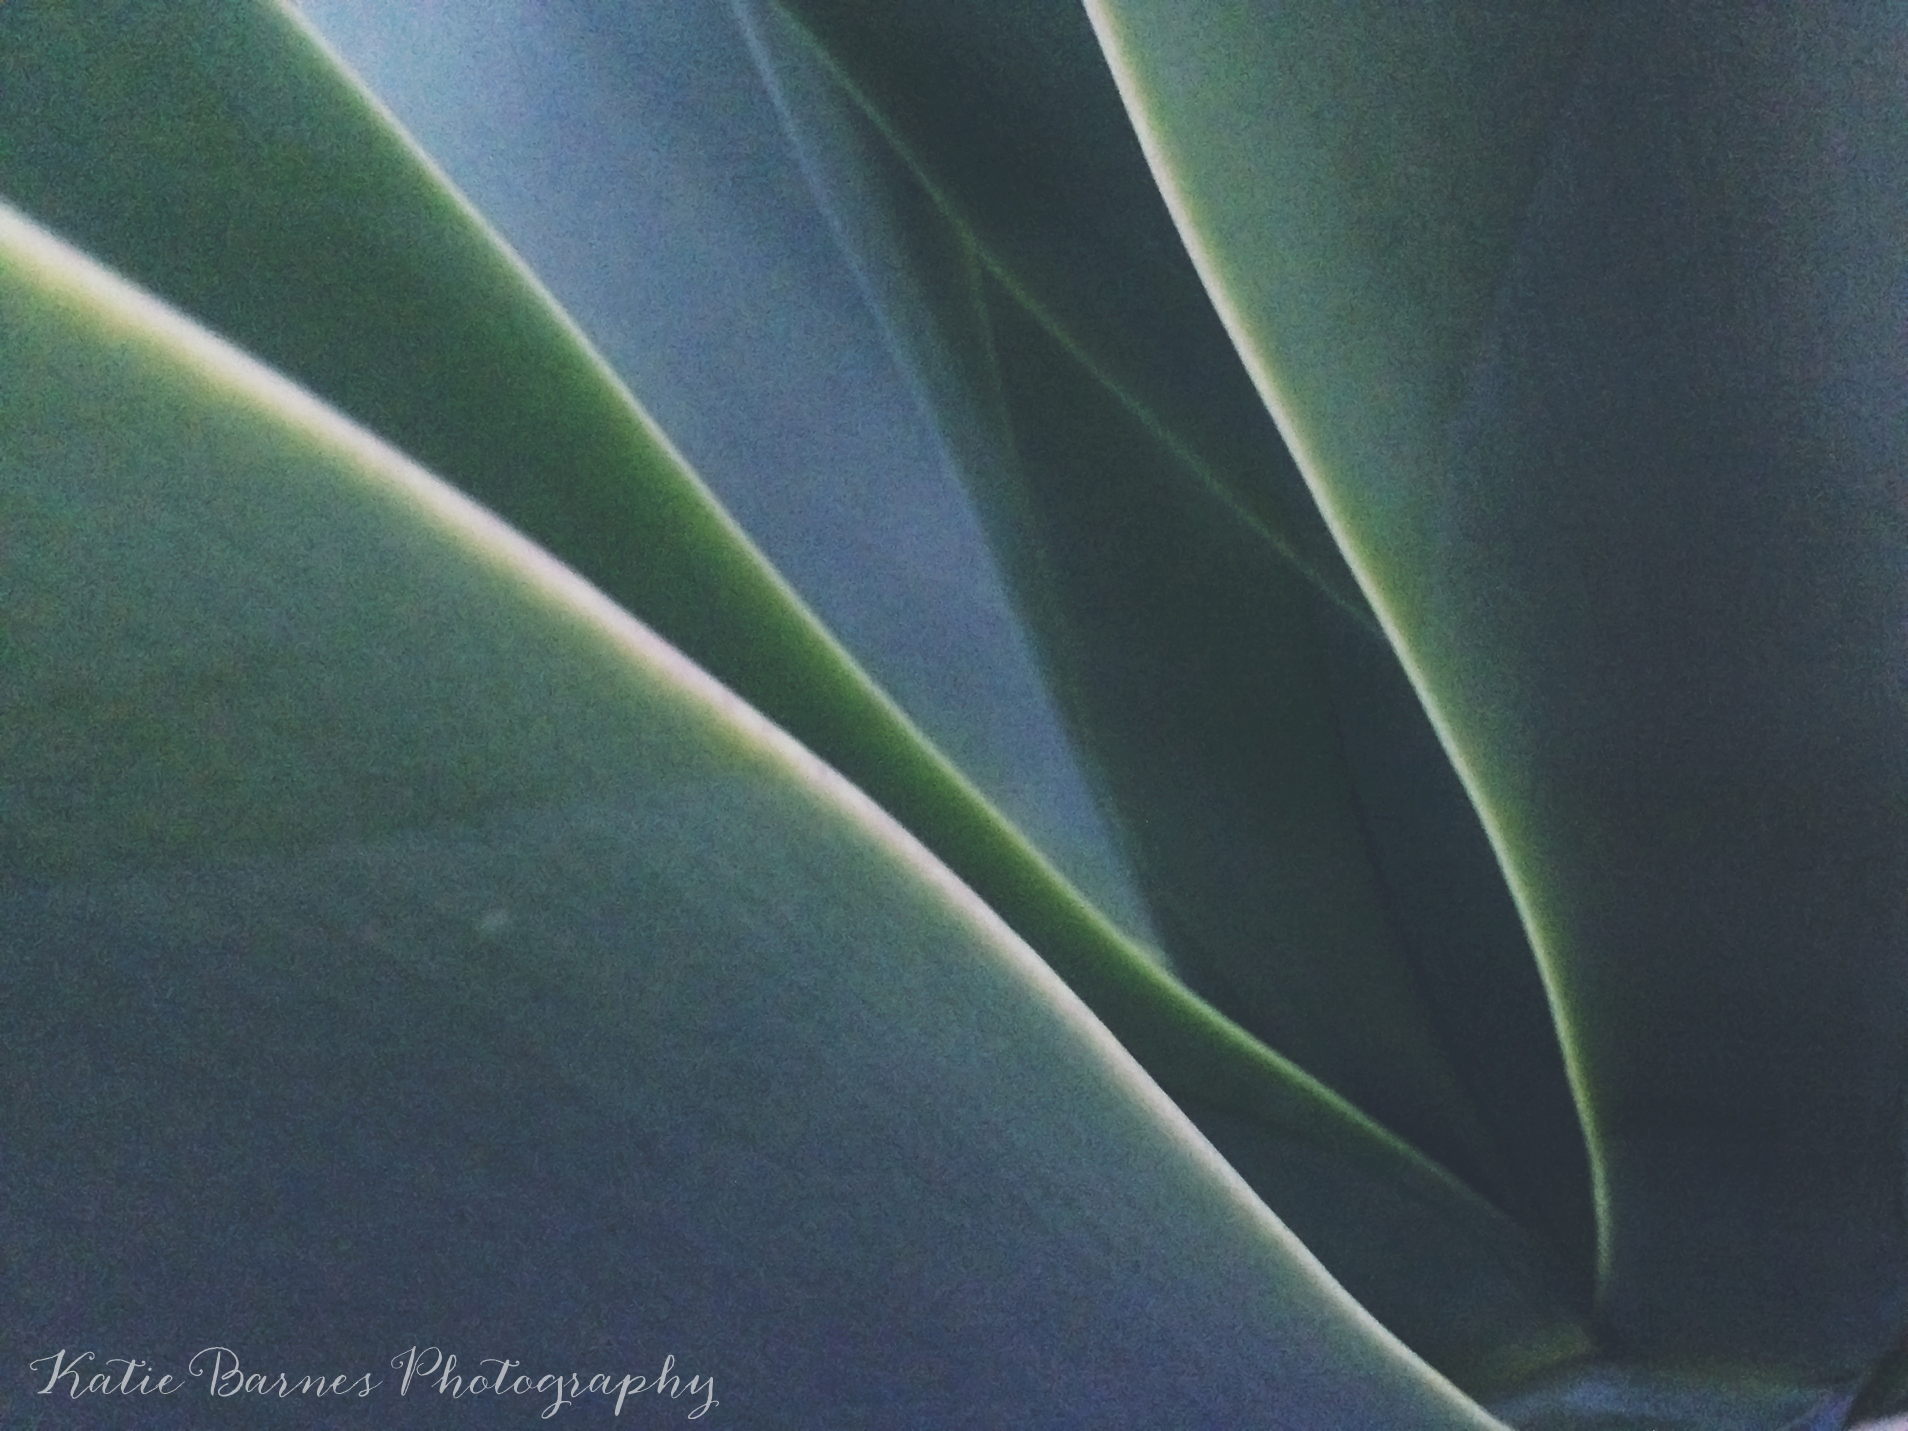 Fine art abstract photo of agave century plant leaves in Venice, CA.